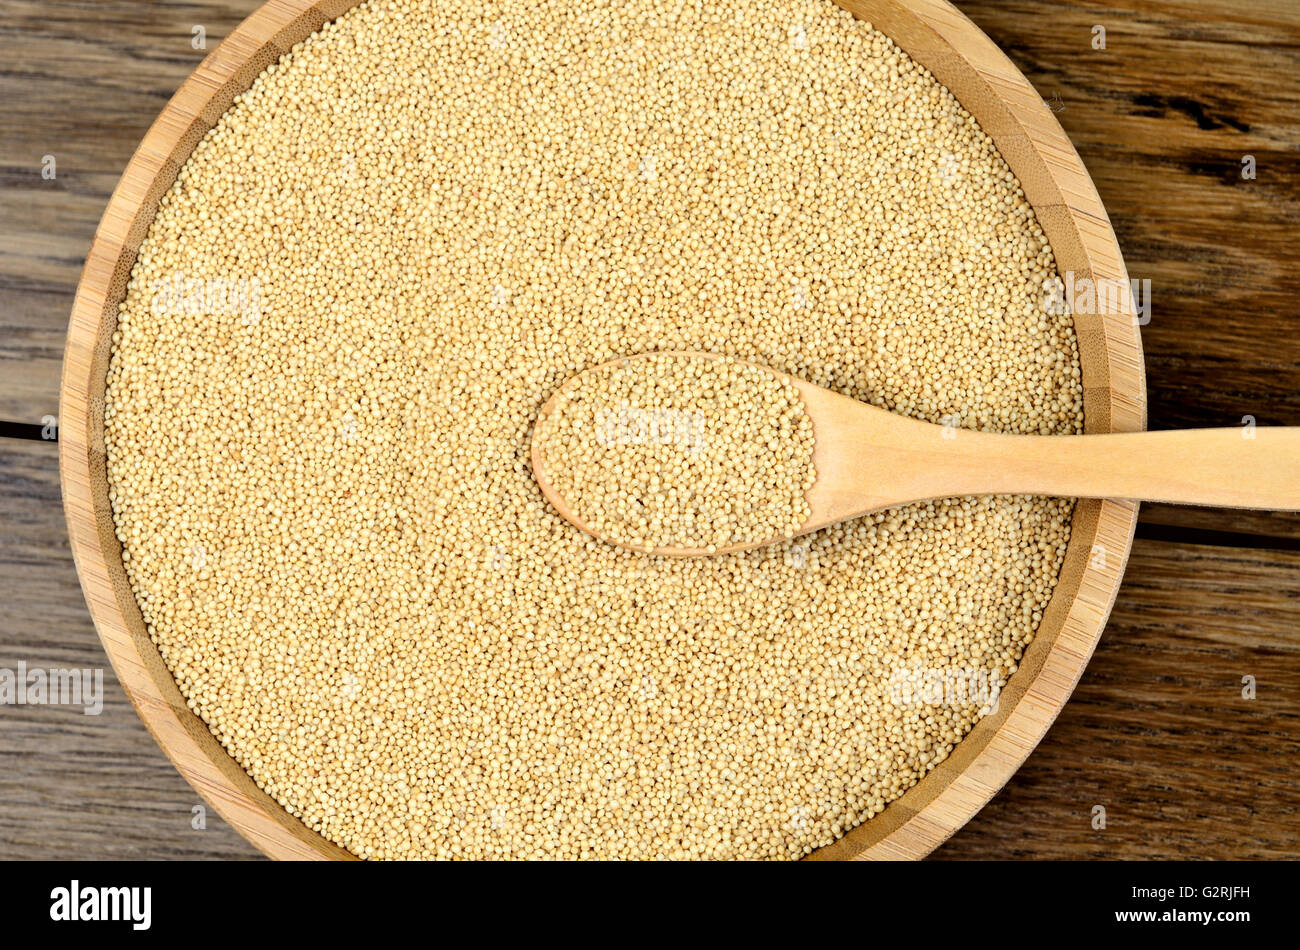 Healthy amaranth seeds in a bamboo bowl on wooden table Stock Photo